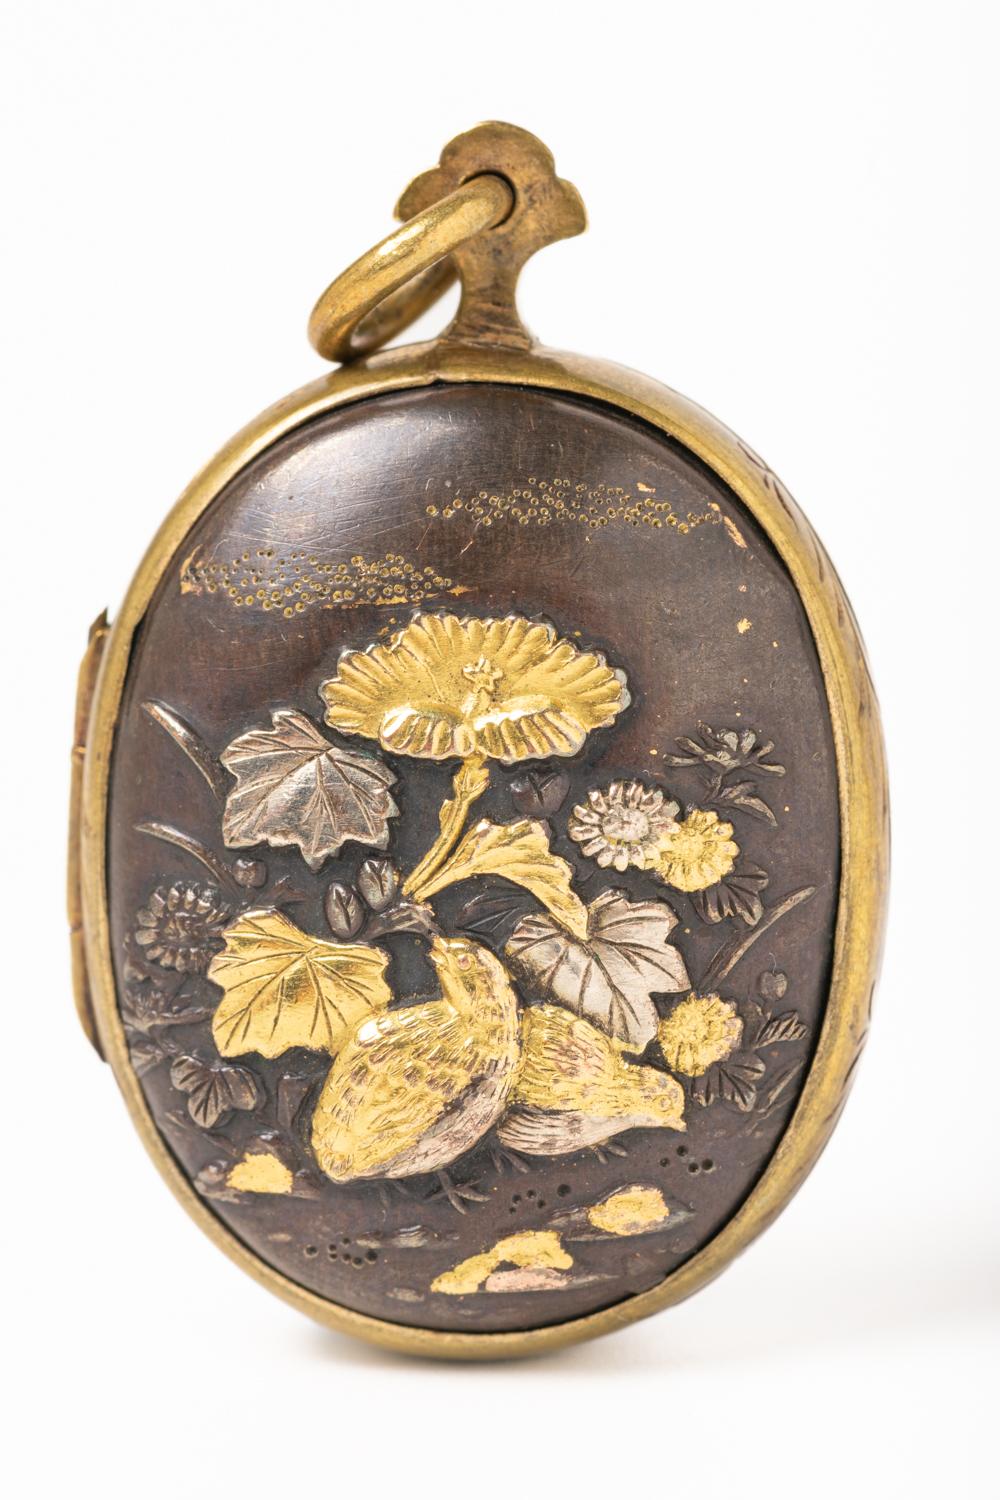 Rare 19th century Shakudo Meiji Double-Sided mixed media locket, made in silver and yellow gold probably 18ct. One side of the locket depicts a pair of quails amongst foliage, chrysanthemums, and gentian. The quail 'uzura' represents the fighting